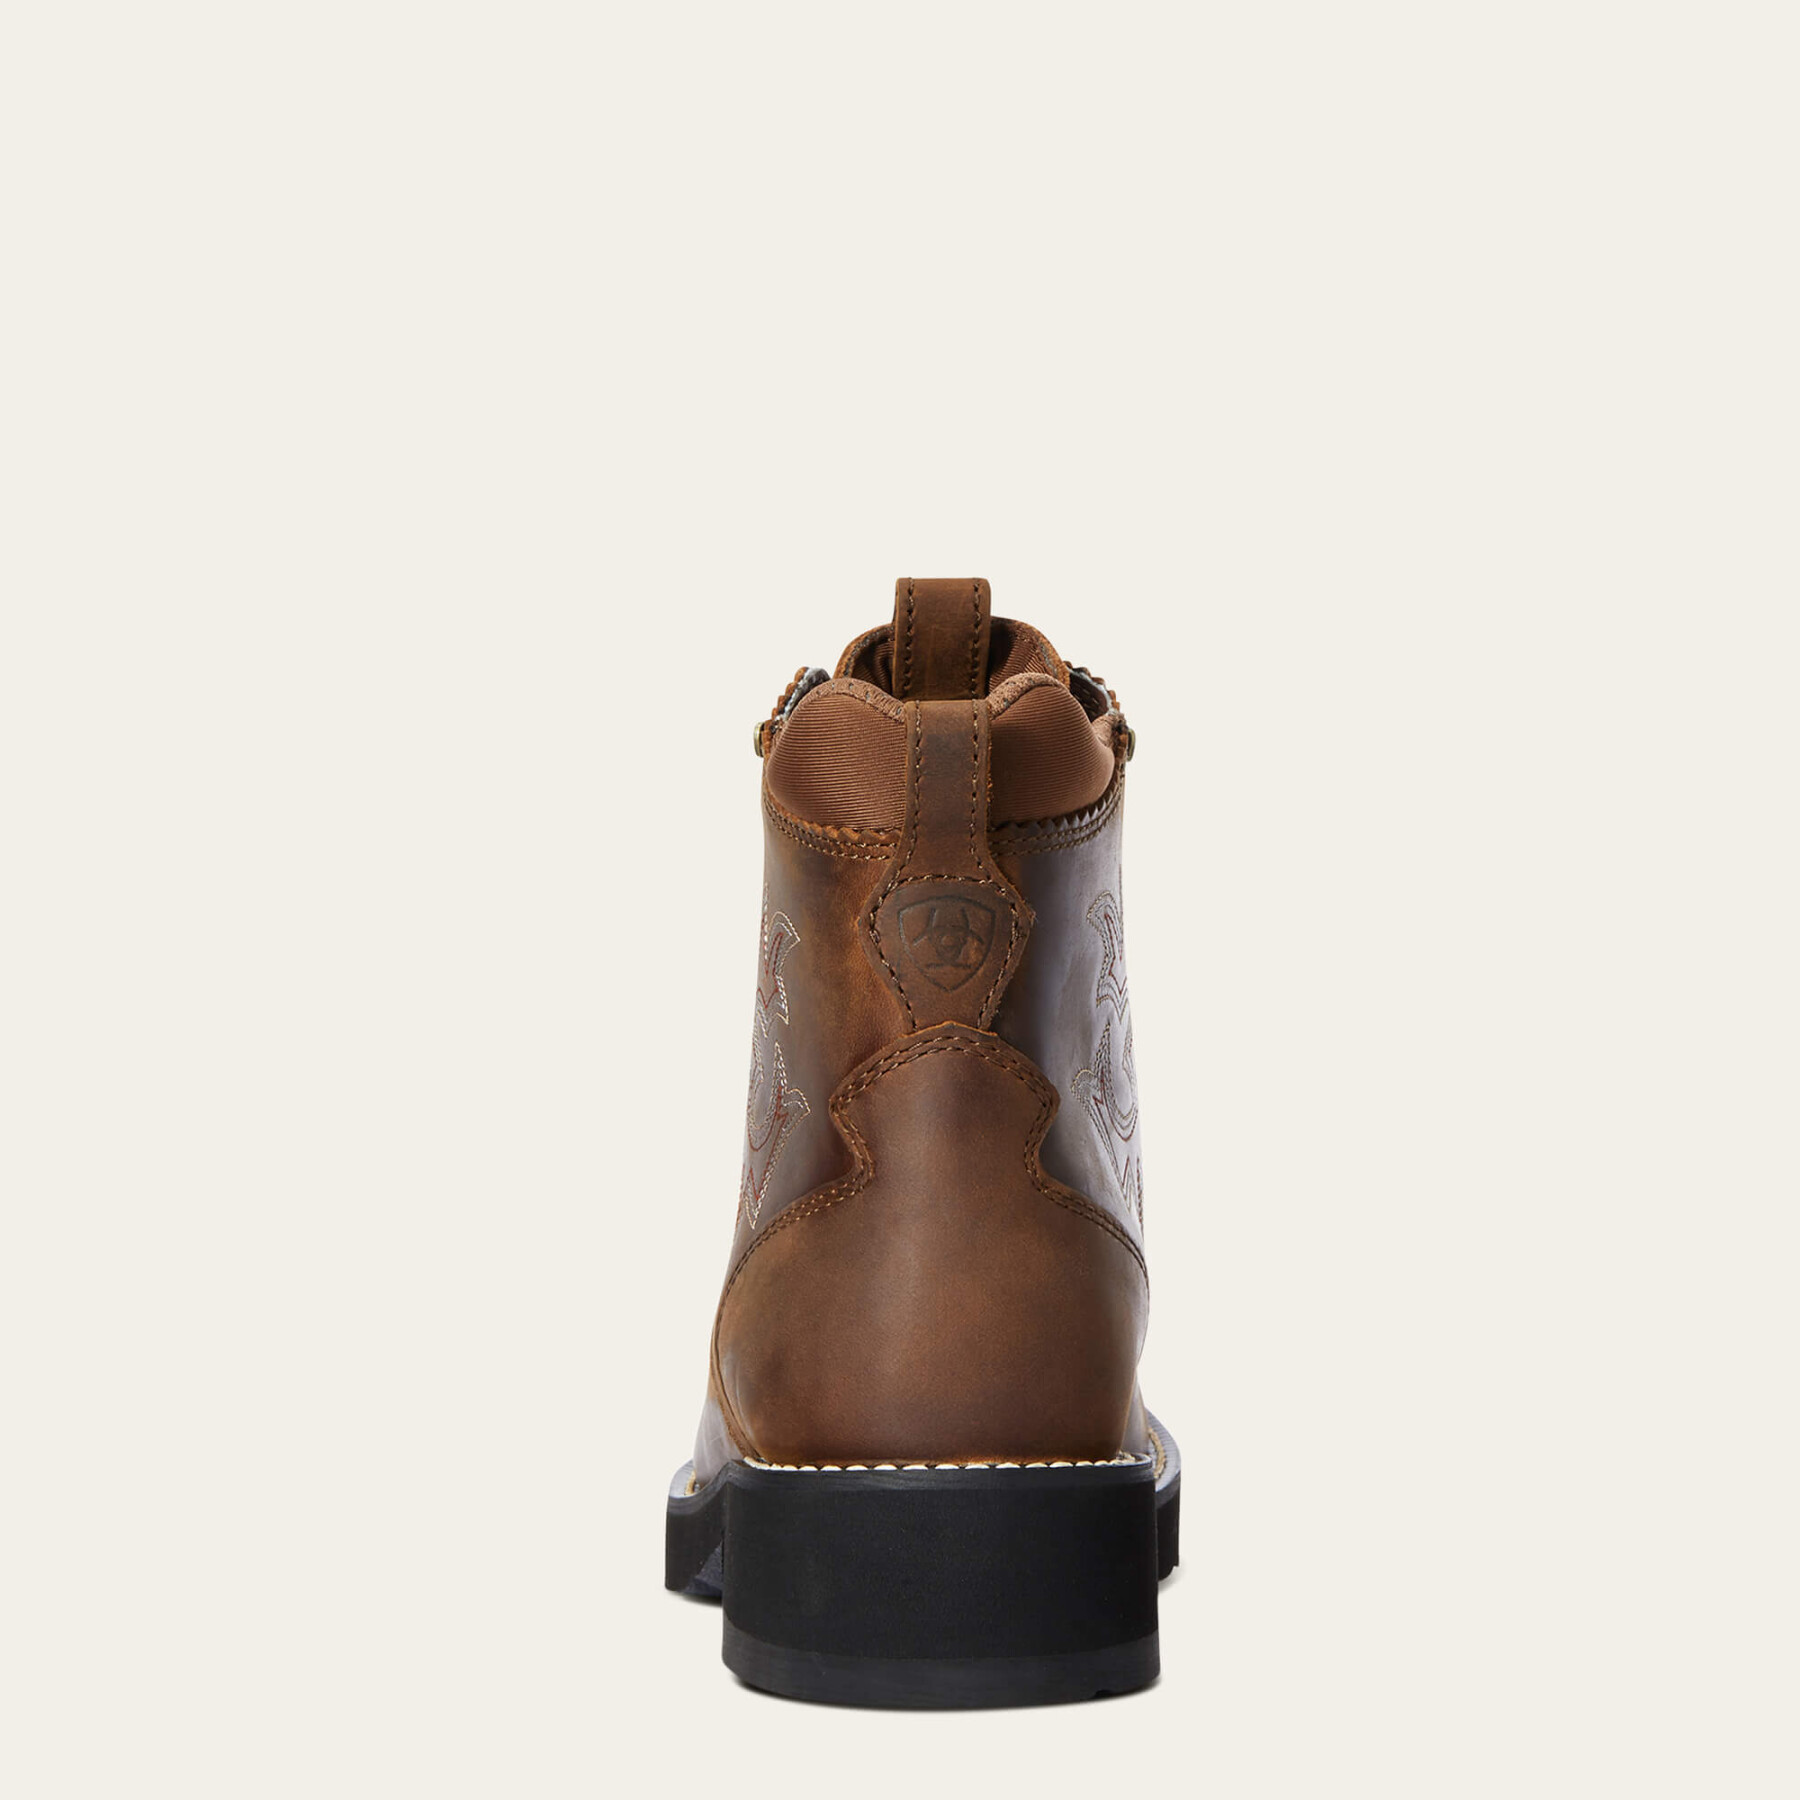 Women's boots Ariat Probaby Lacer